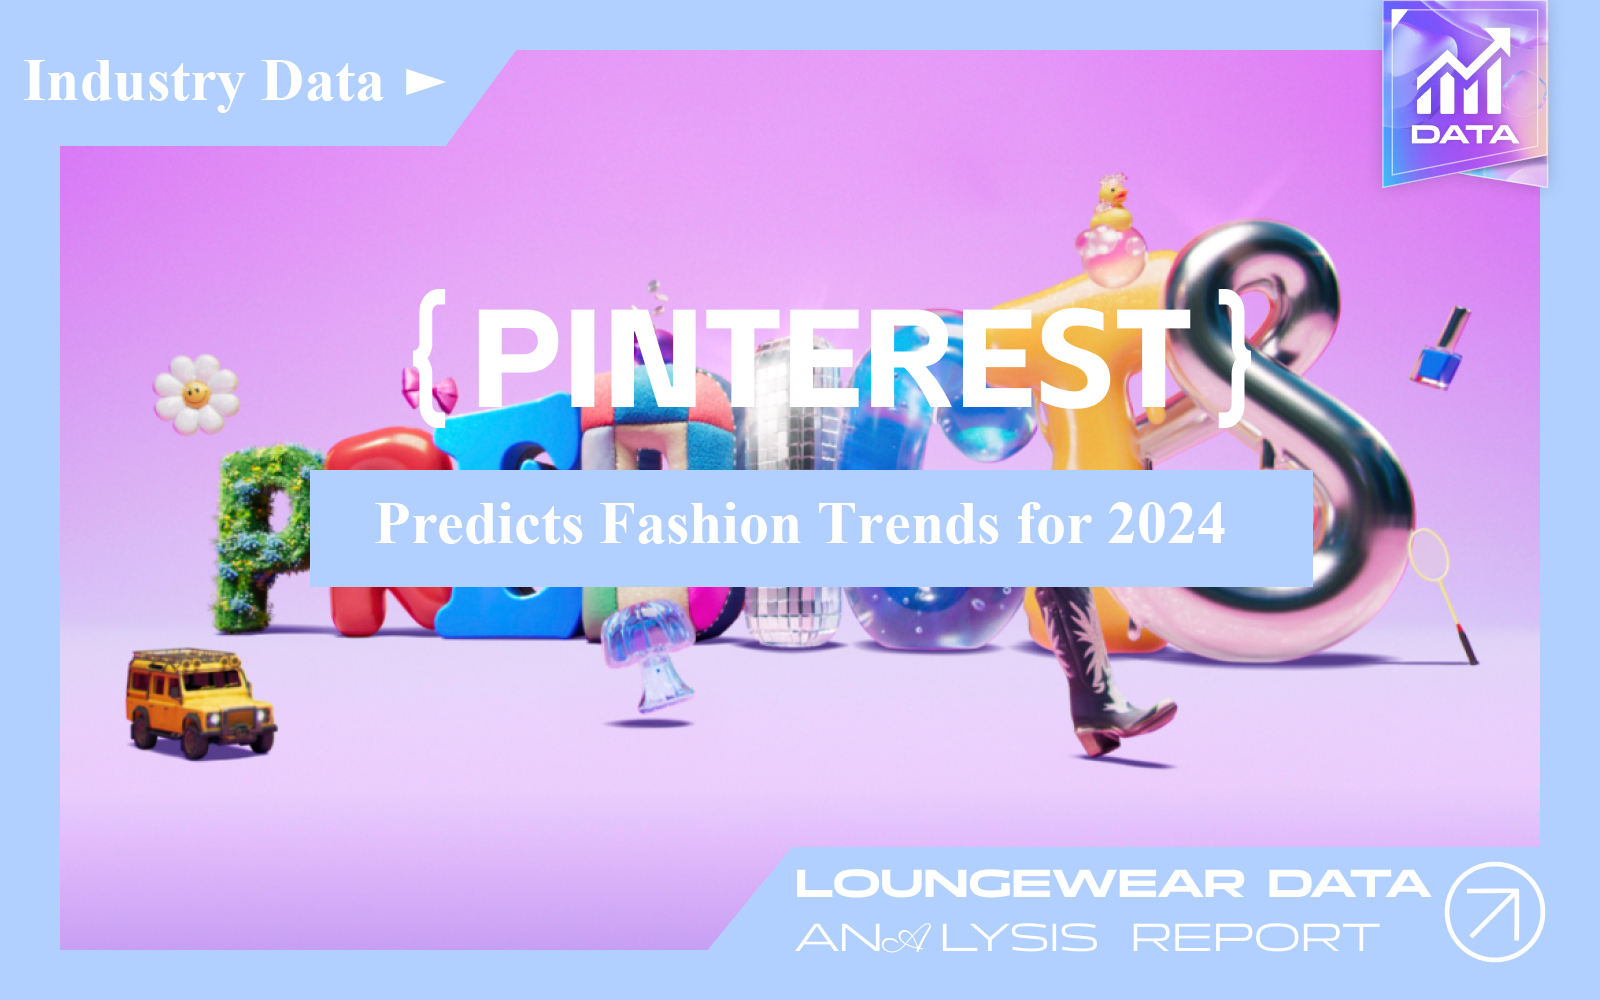 Pinterest Predicts Fashion & Beauty Trends for 2024